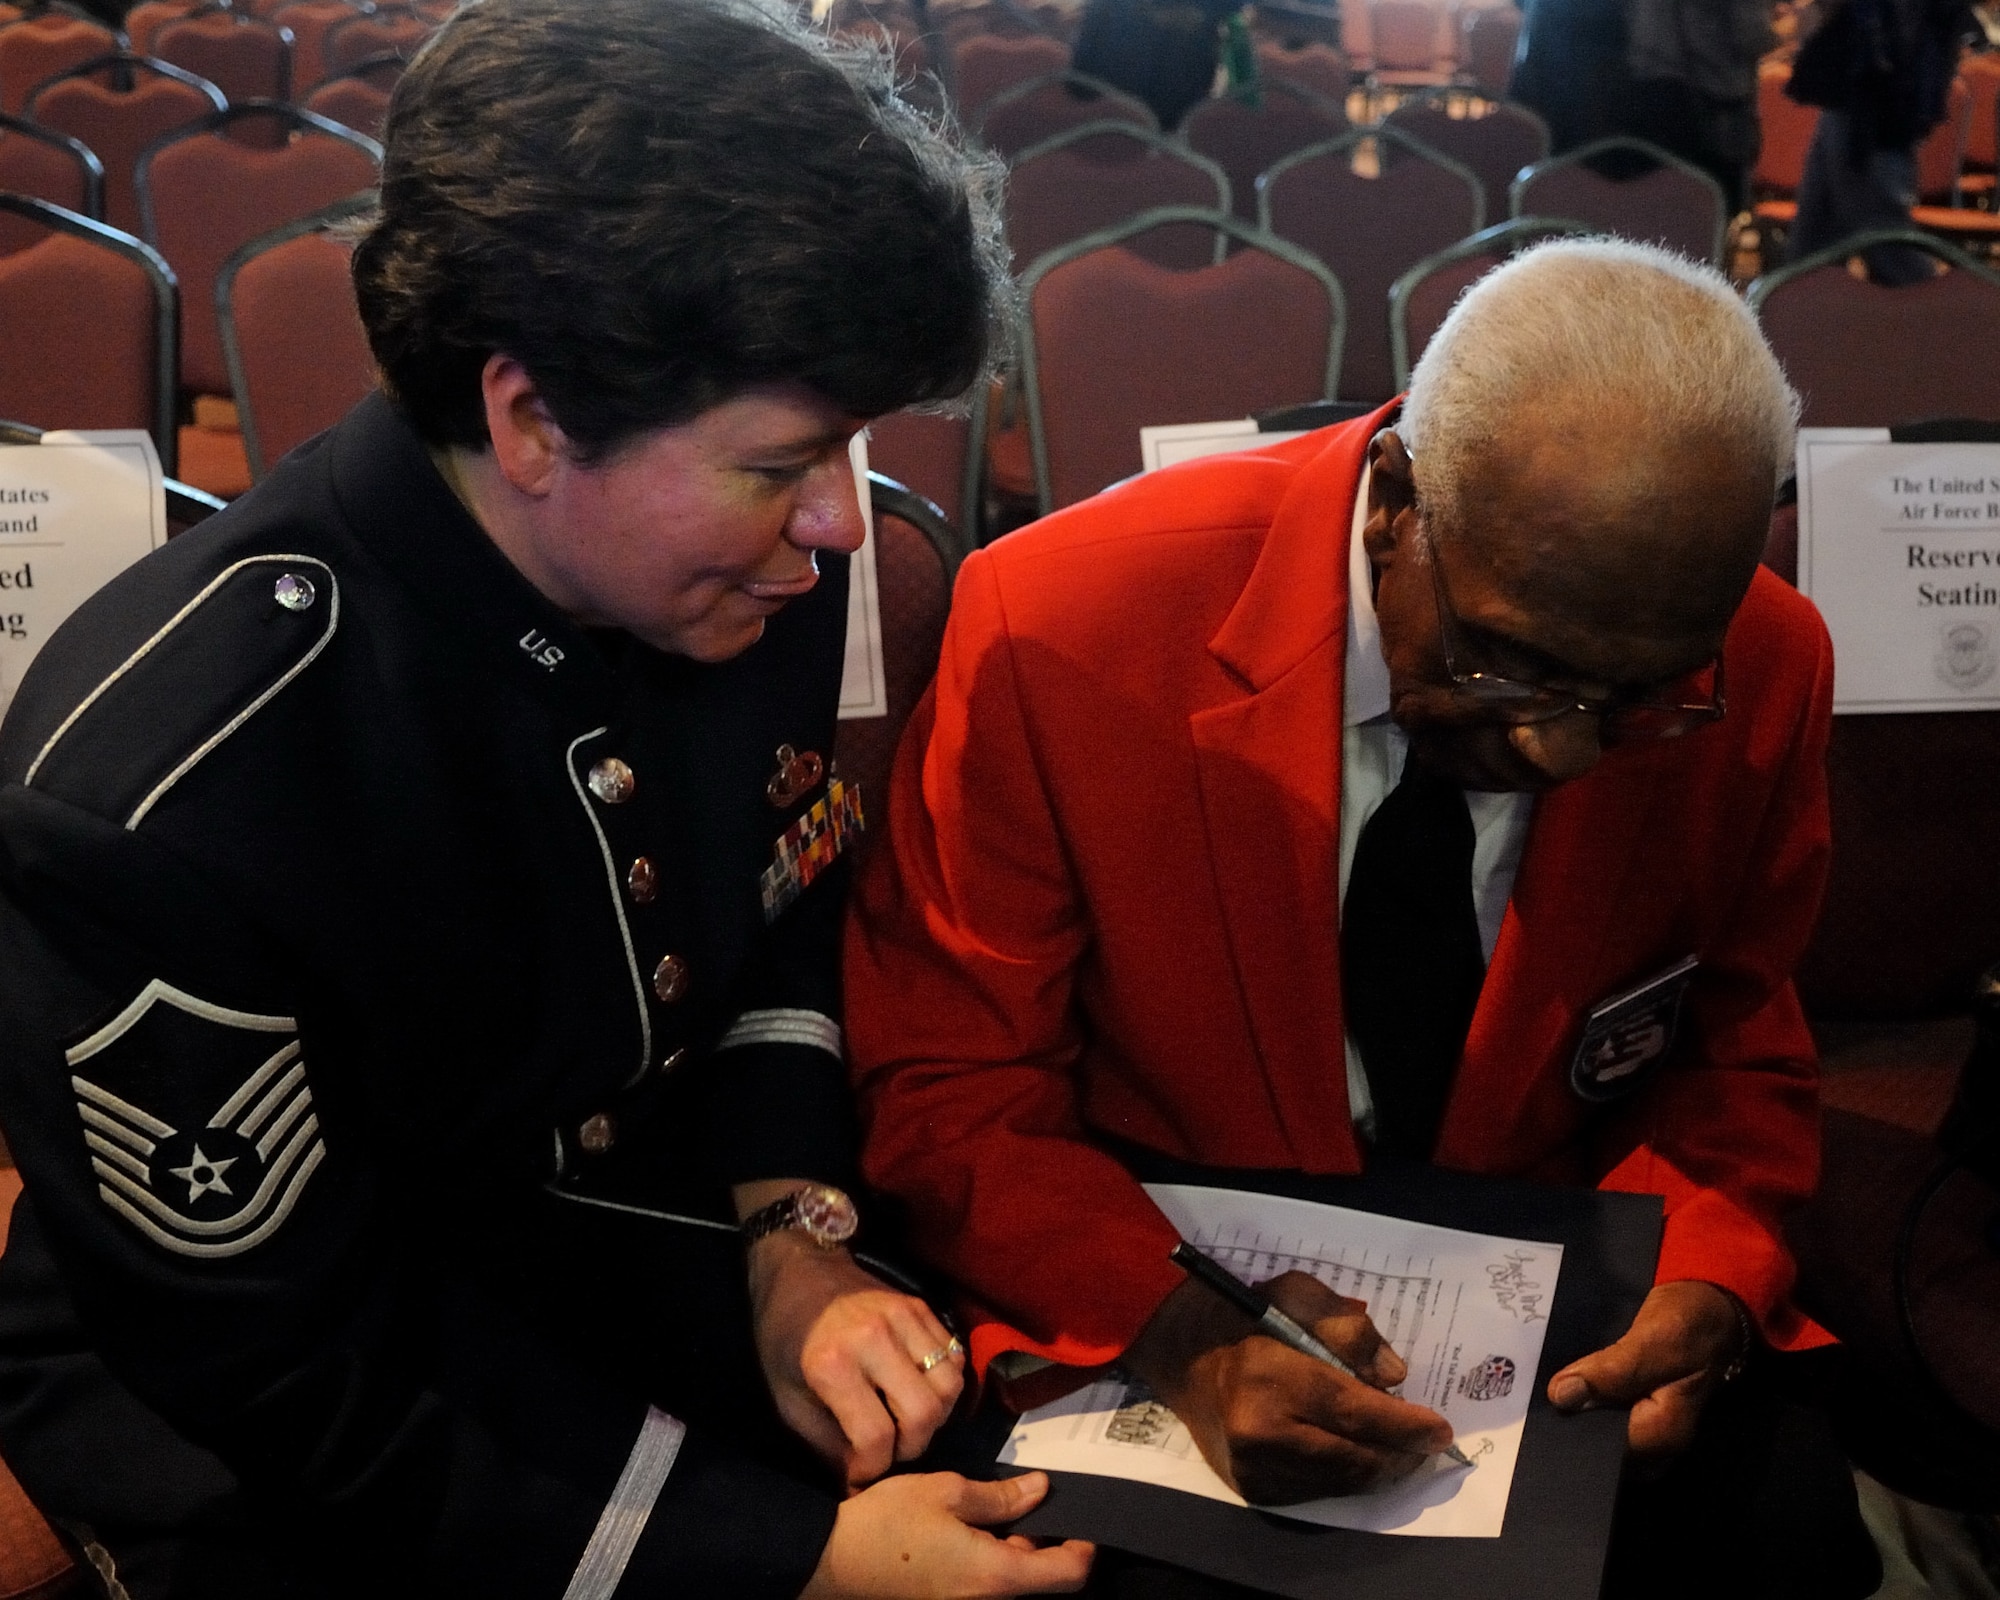 Retired U.S. Air Force Chief Master Sgt. Richard R. Hall, Jr., a member of the Tuskegee Airmen, signs a score sheet for U.S. Air Force Master Sgt. Tara Islas, a U.S. Air Force Band Ceremonial Brass french hornist and native of Mobile, Ala., following a concert at The First Academy Faith Hall in Orlando, Fla., Jan. 14, 2011.  The U.S. Air Force Band Ceremonial Brass honored Tuskegee Airmen, the first African American military aviators in the U.S. armed forces, during their performance, playing a new work entitle "Red Tail Skirmish."  U.S. Air Force photo by Master Sgt. Adam M. Stump/Released.